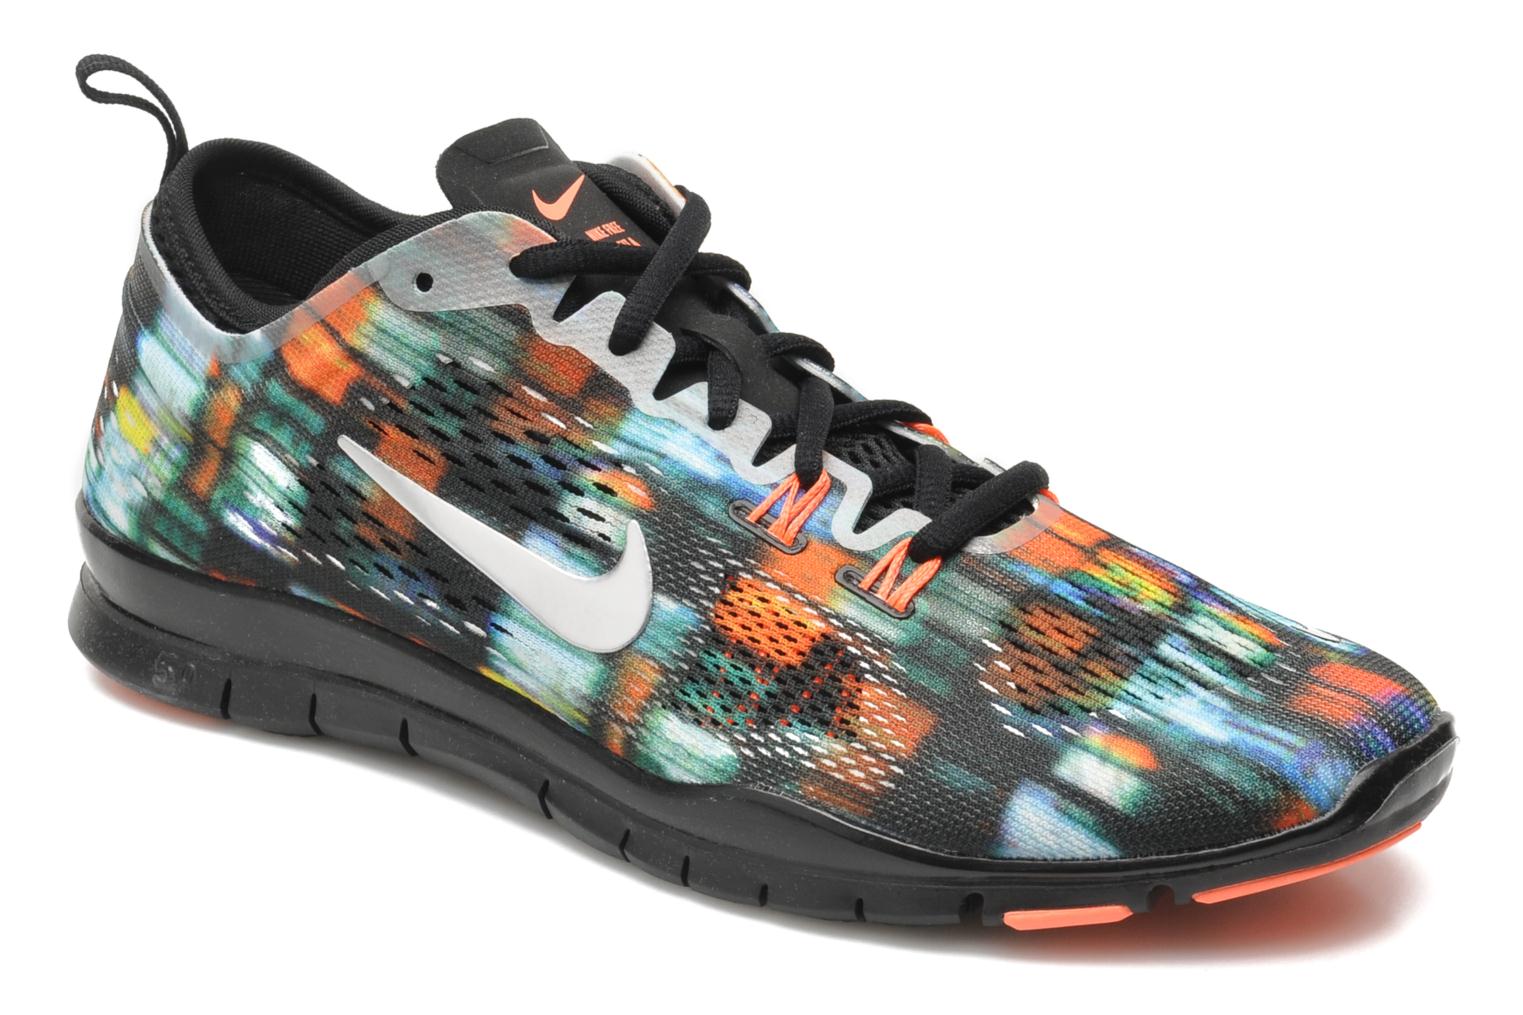 Nike Free 5.0 TR Fit 4 Print Women's Training Shoes Review | The Gains